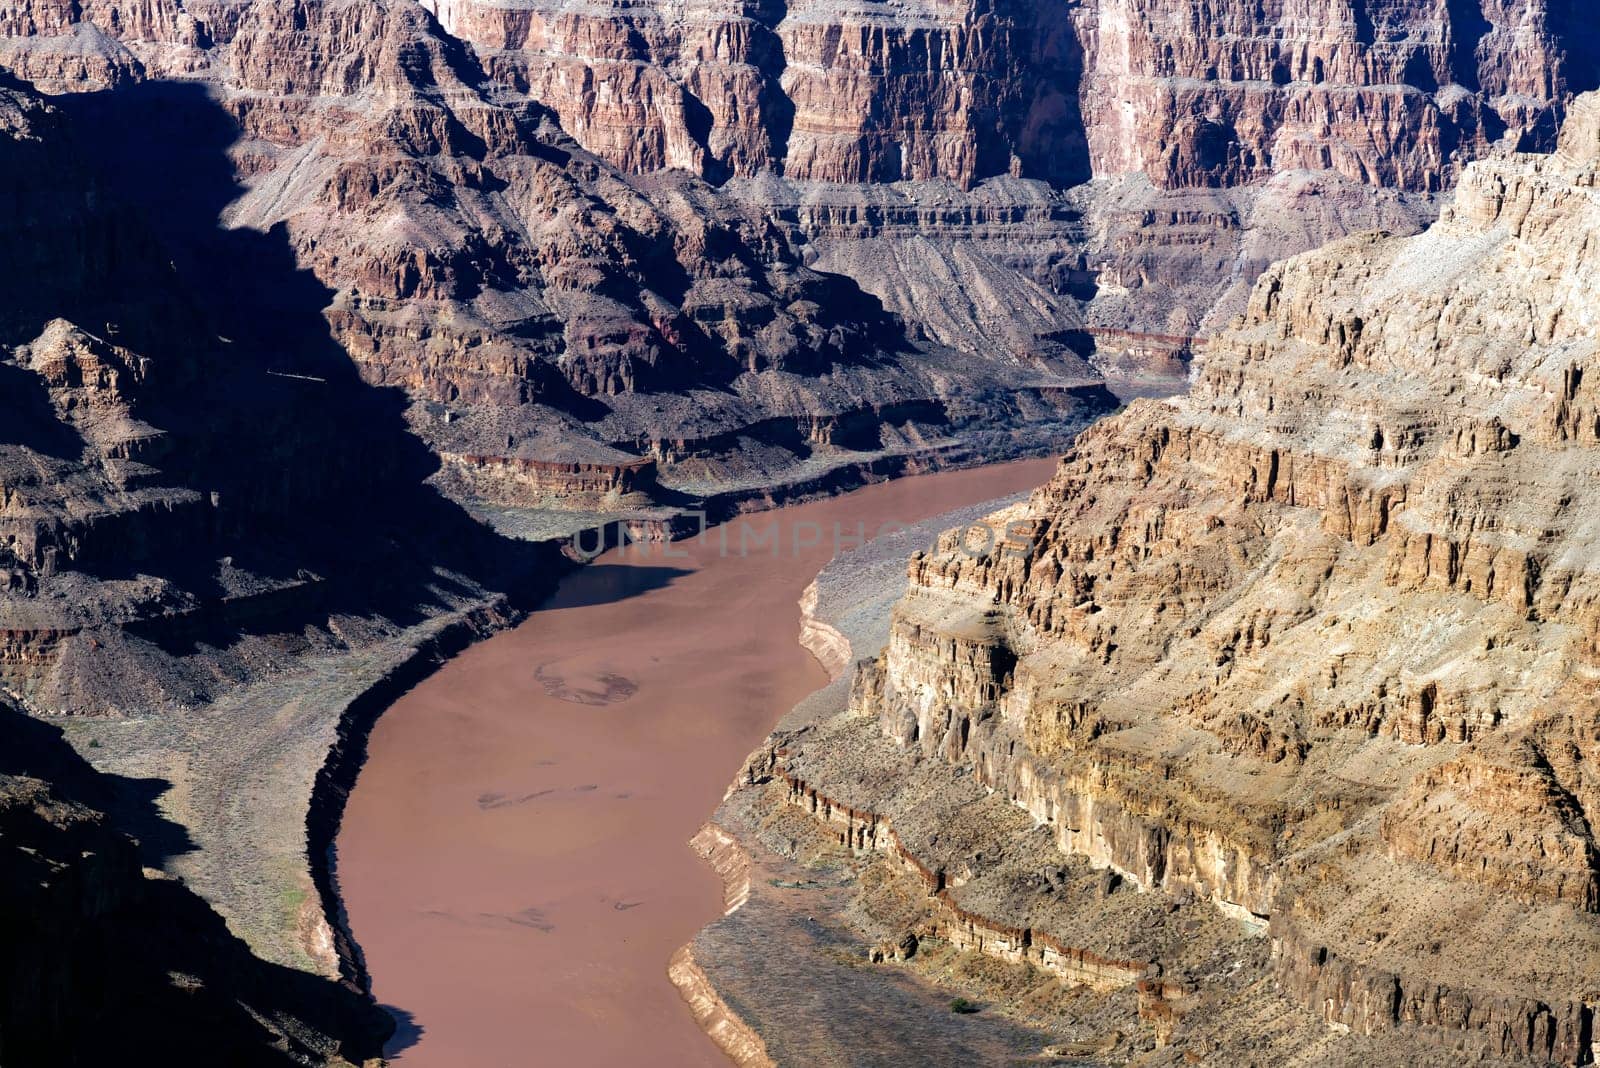 Witness the mighty Colorado River as it winds through the base of Grand Canyon West, captured at an elevation of 1,160 ft (350 m) in this high-resolution photograph. The image provides a mesmerizing perspective on the river role in carving this iconic landscape over millennia. The water emerald hue contrasts beautifully with the towering red-rock formations, creating a scene of breathtaking grandeur. Perfect for adding a sense of depth and history to your home, office, or digital project